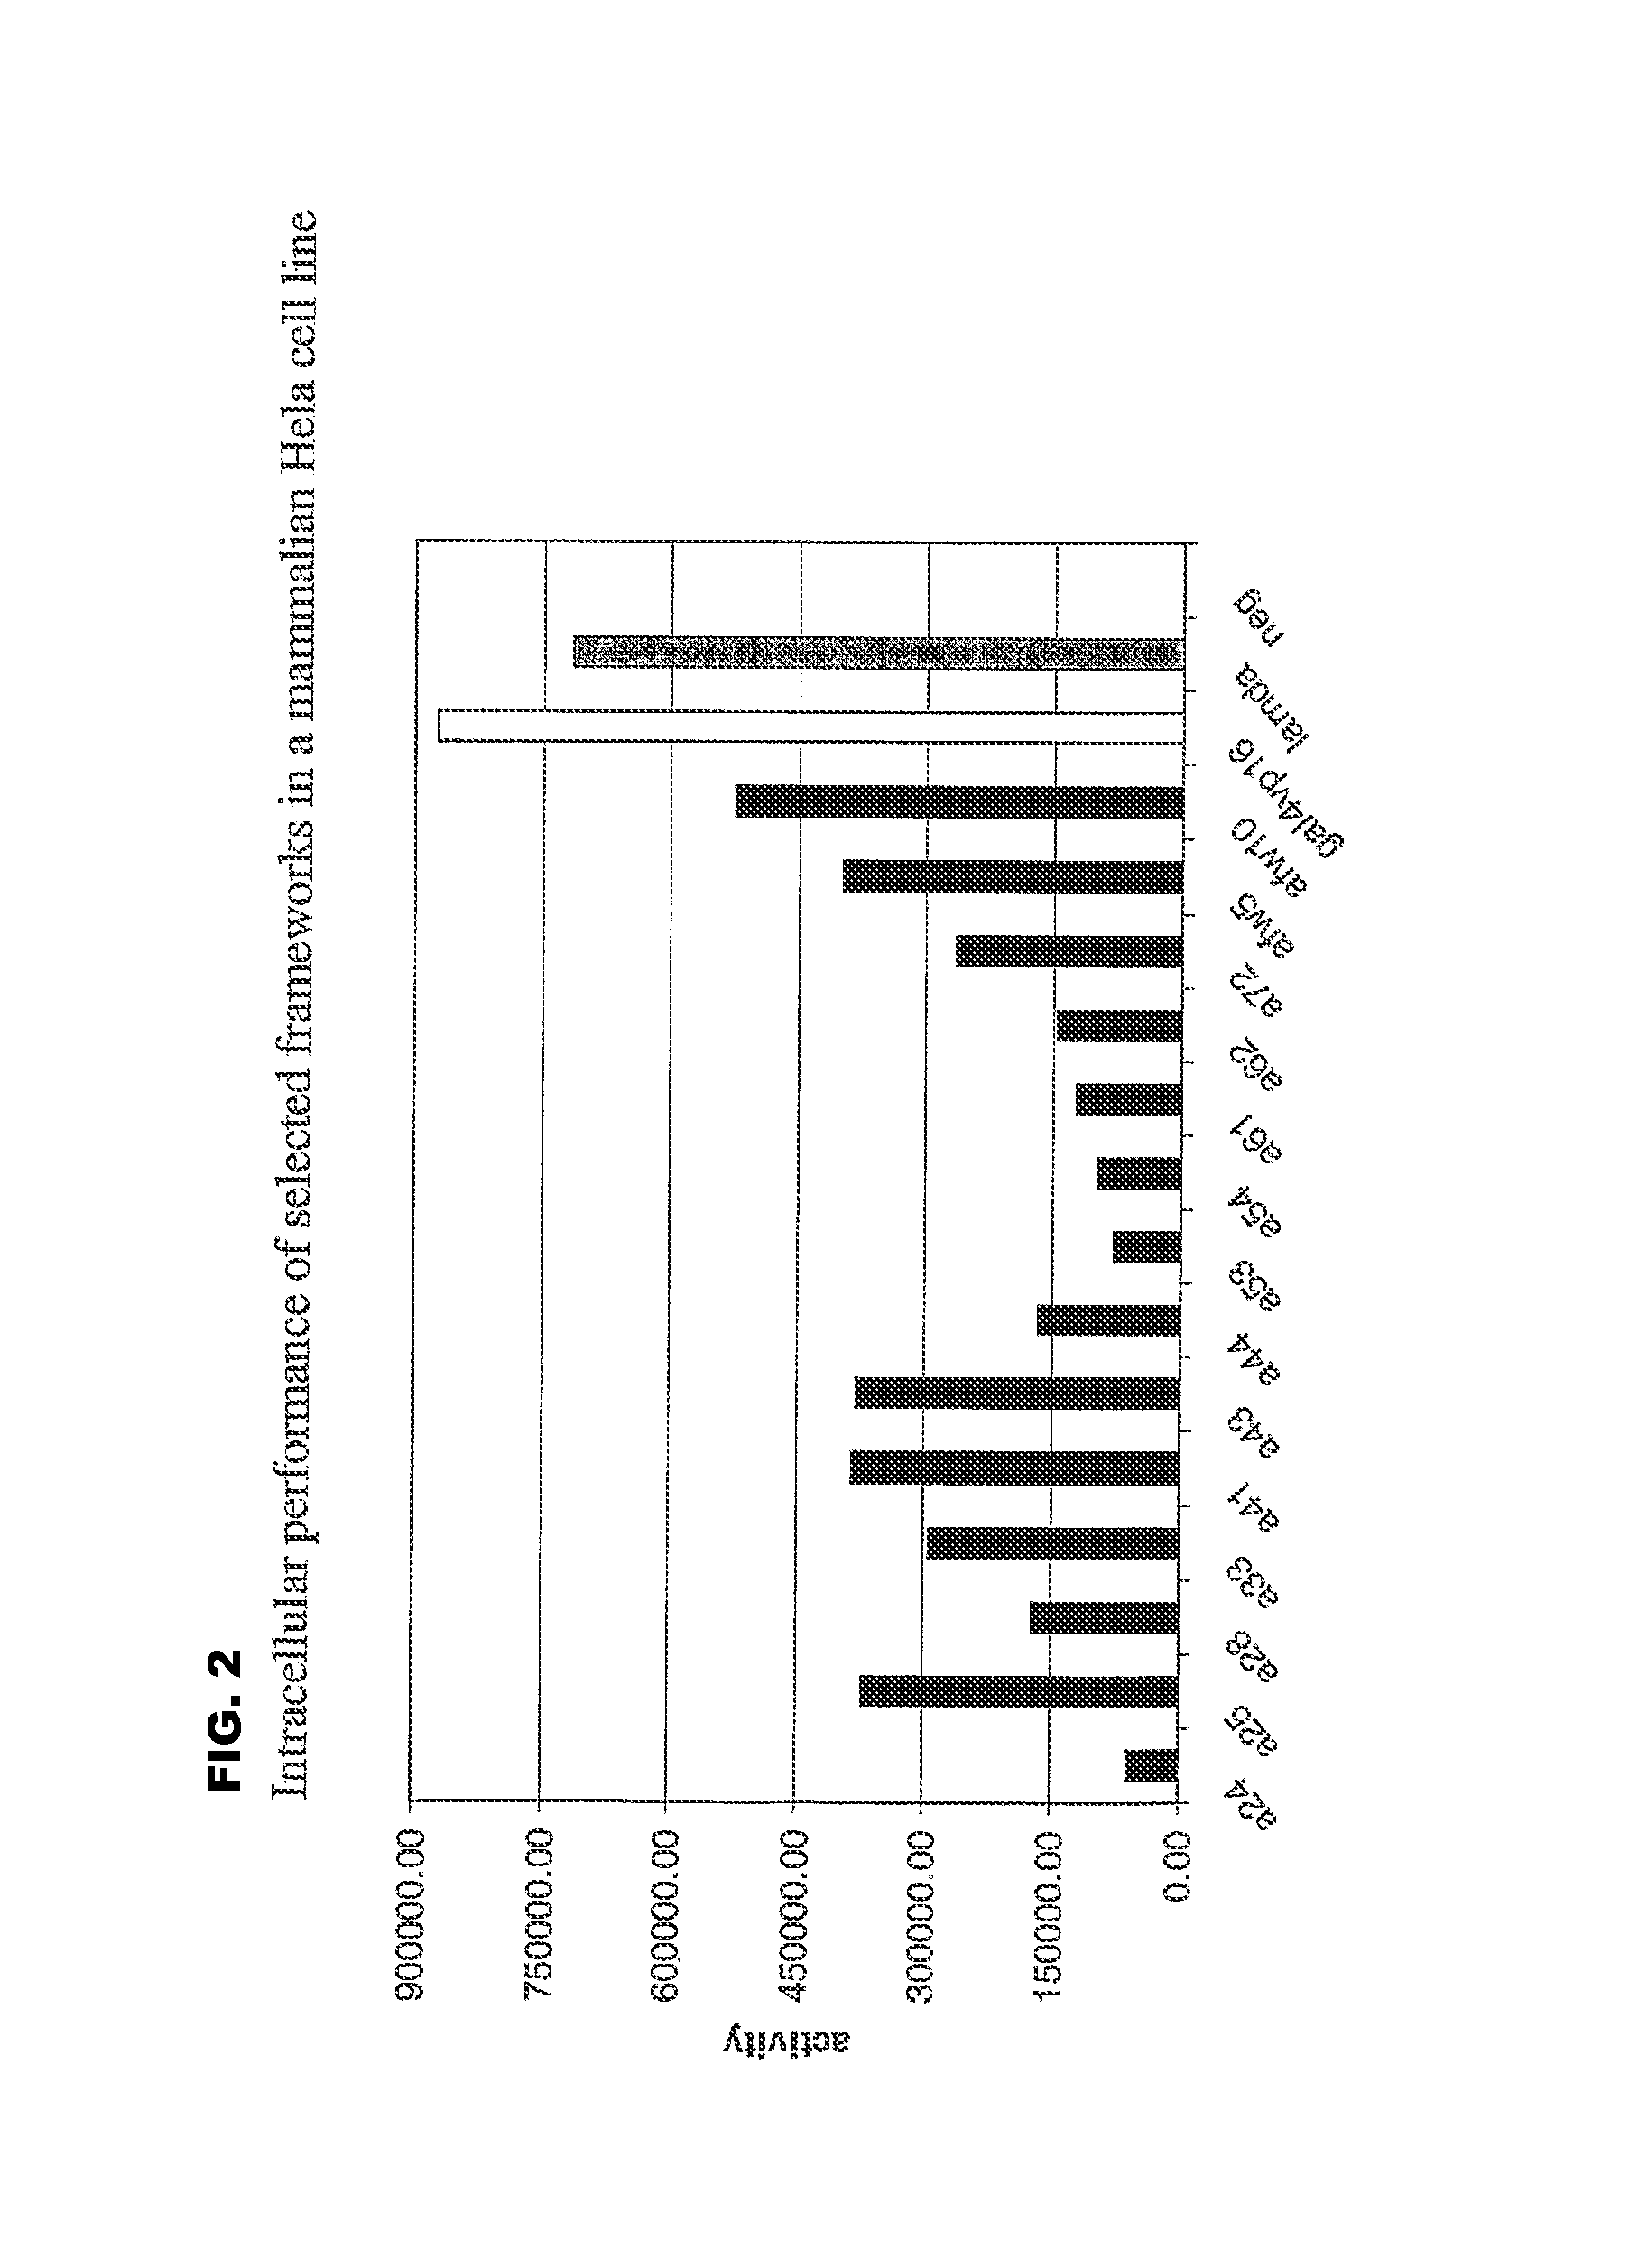 Immunoglobulin frameworks which demonstrate enhanced stability in the intracellular environment and methods of identifying same